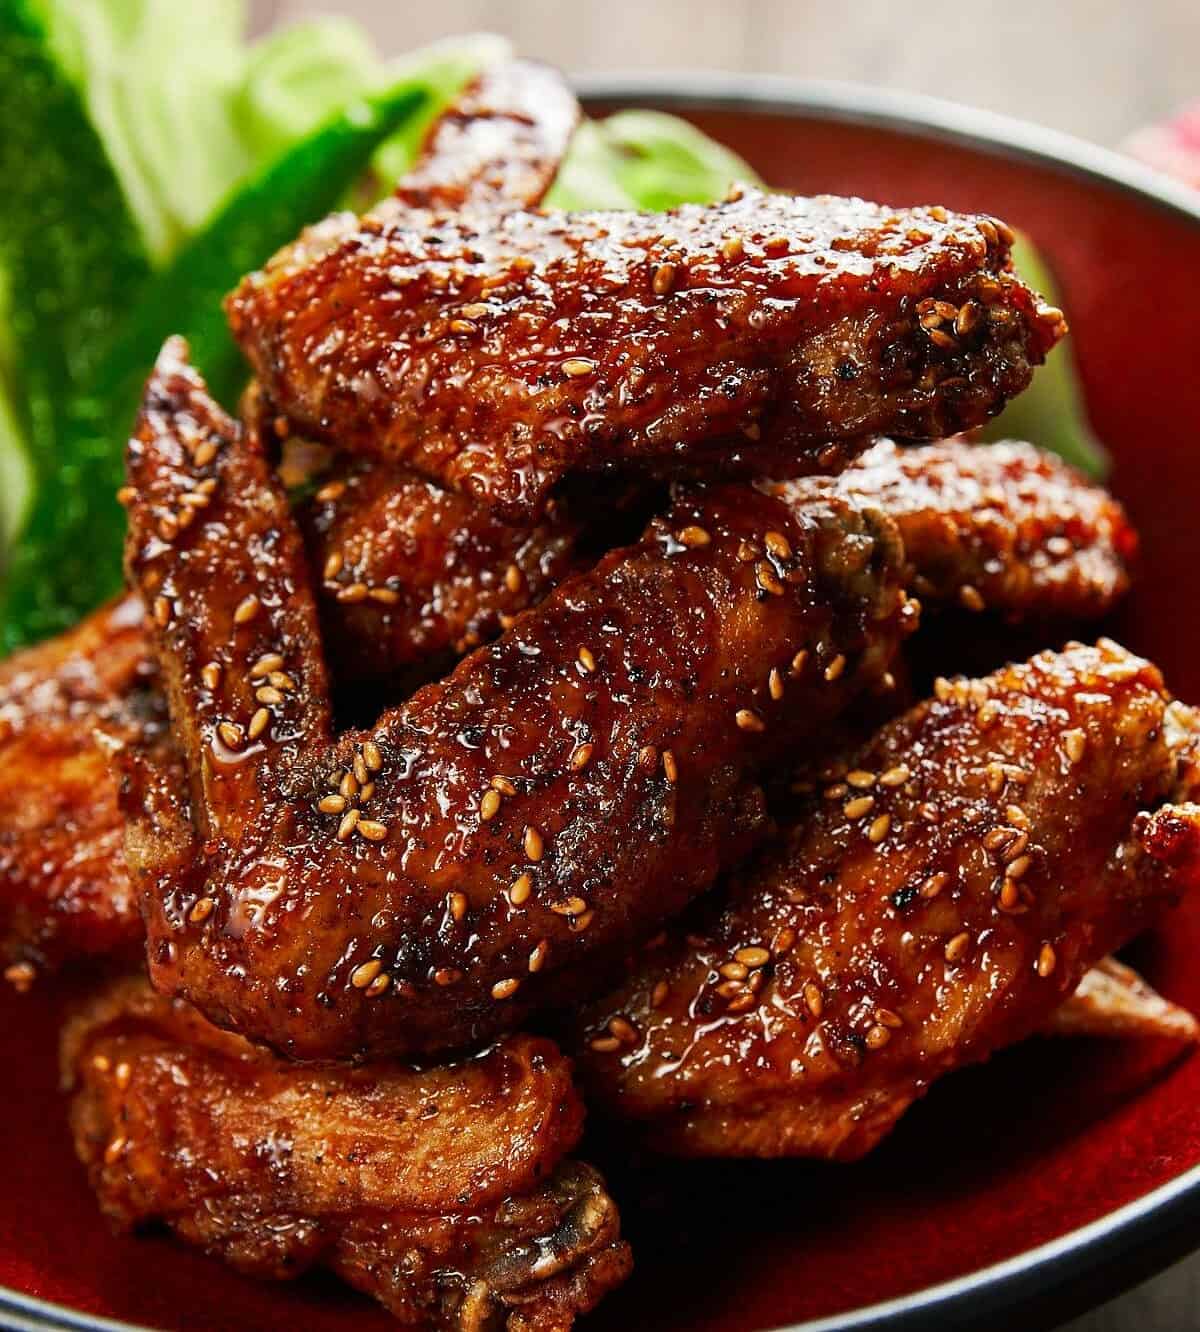  Golden-brown and crispy, these chicken wings will make your taste buds sing.